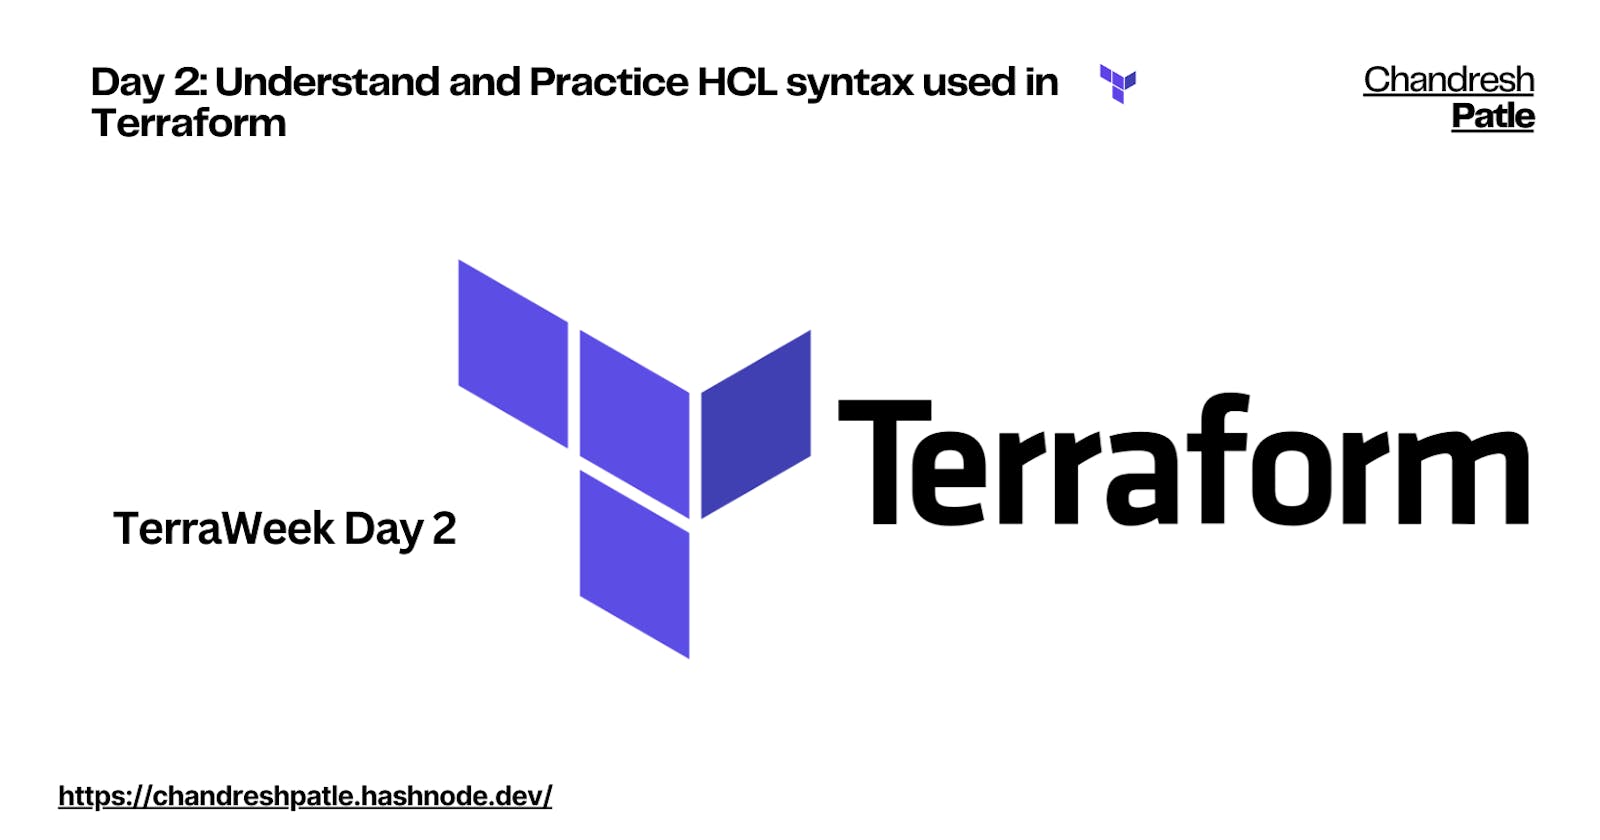 Day2:  Understand and Practice HCL syntax used in Terraform